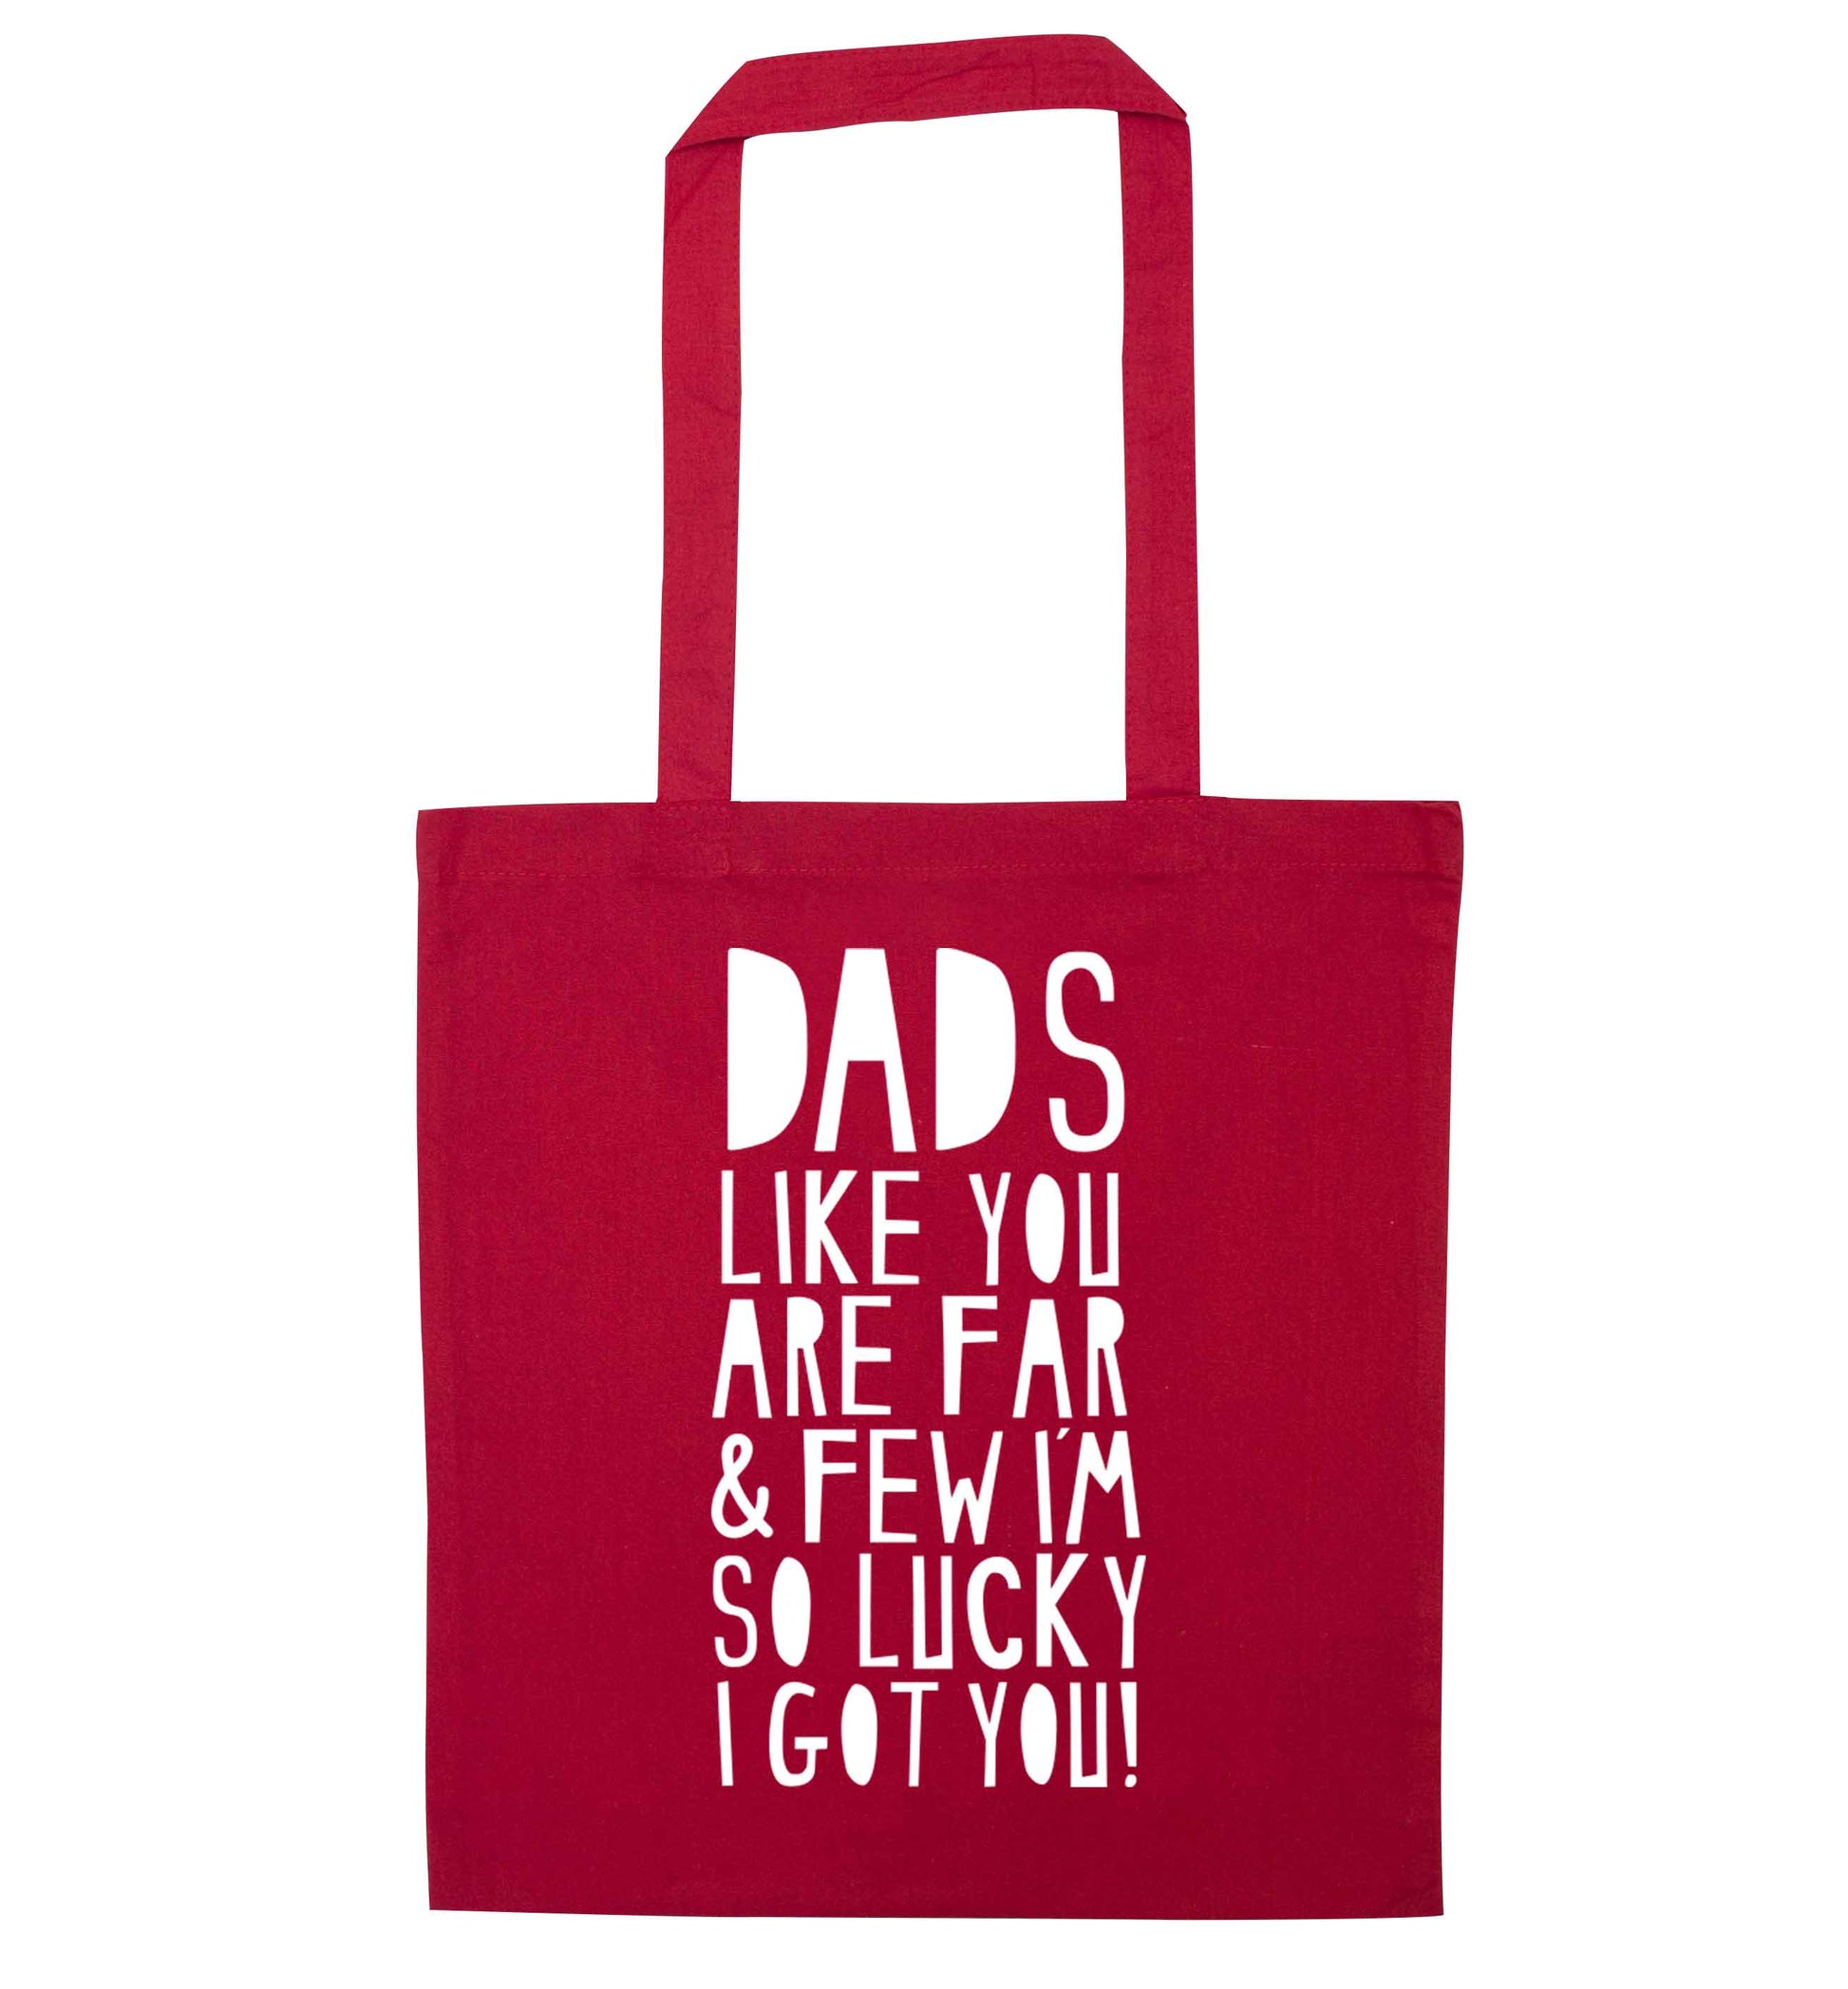 Dads like you are far and few I'm so luck I got you! red tote bag